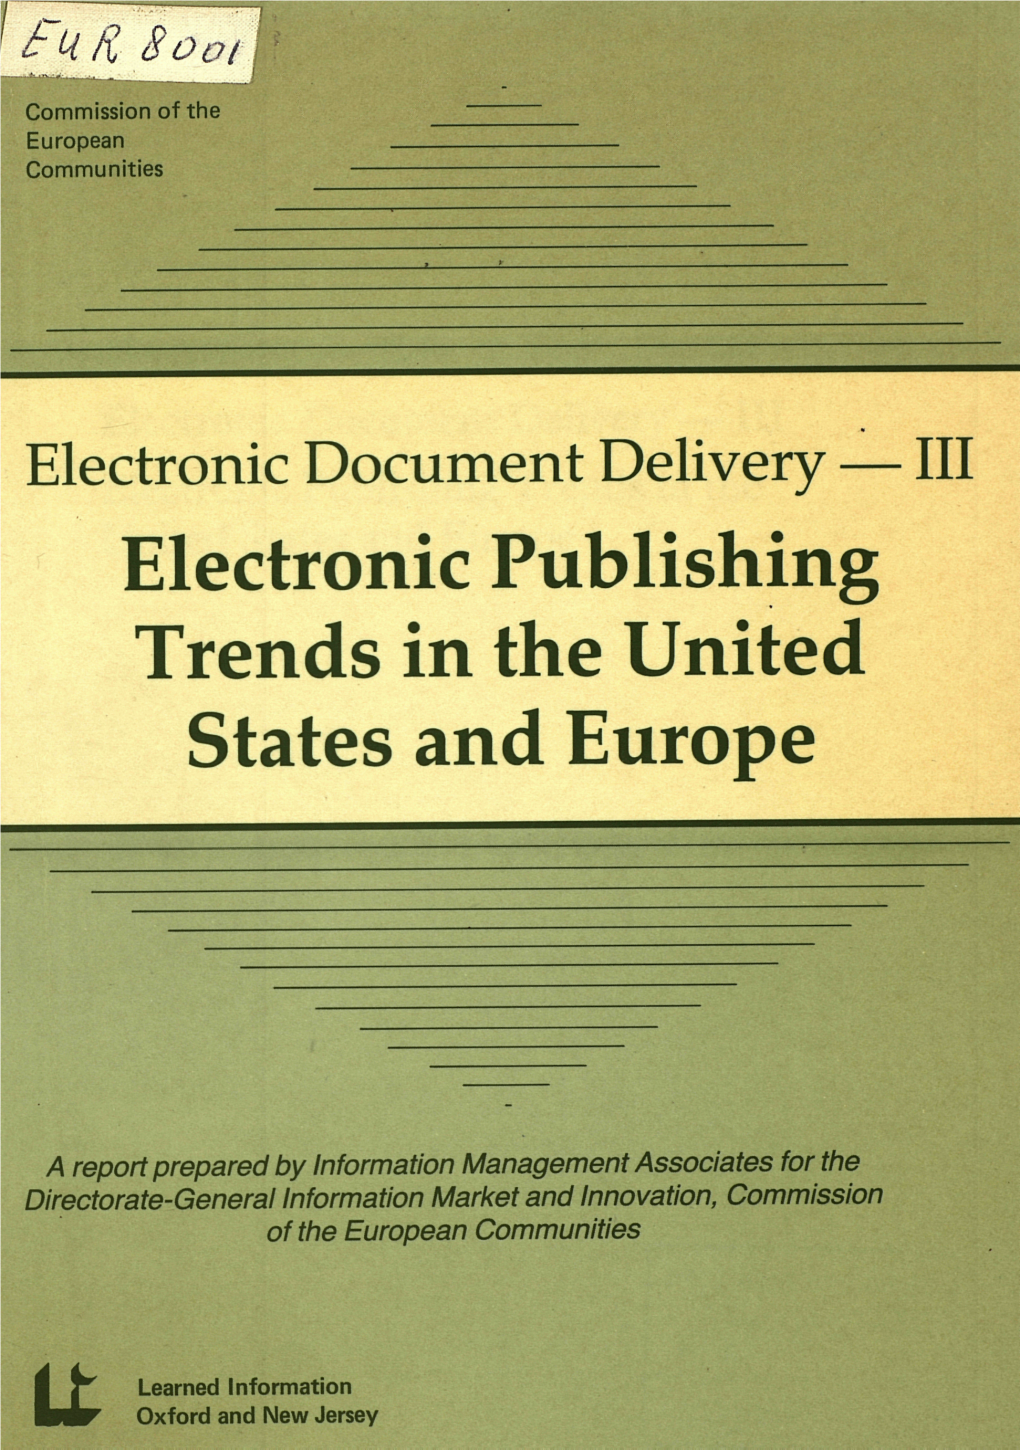 Electronic Document Delivery — III Electronic Publishing Trends in the United States and Europe